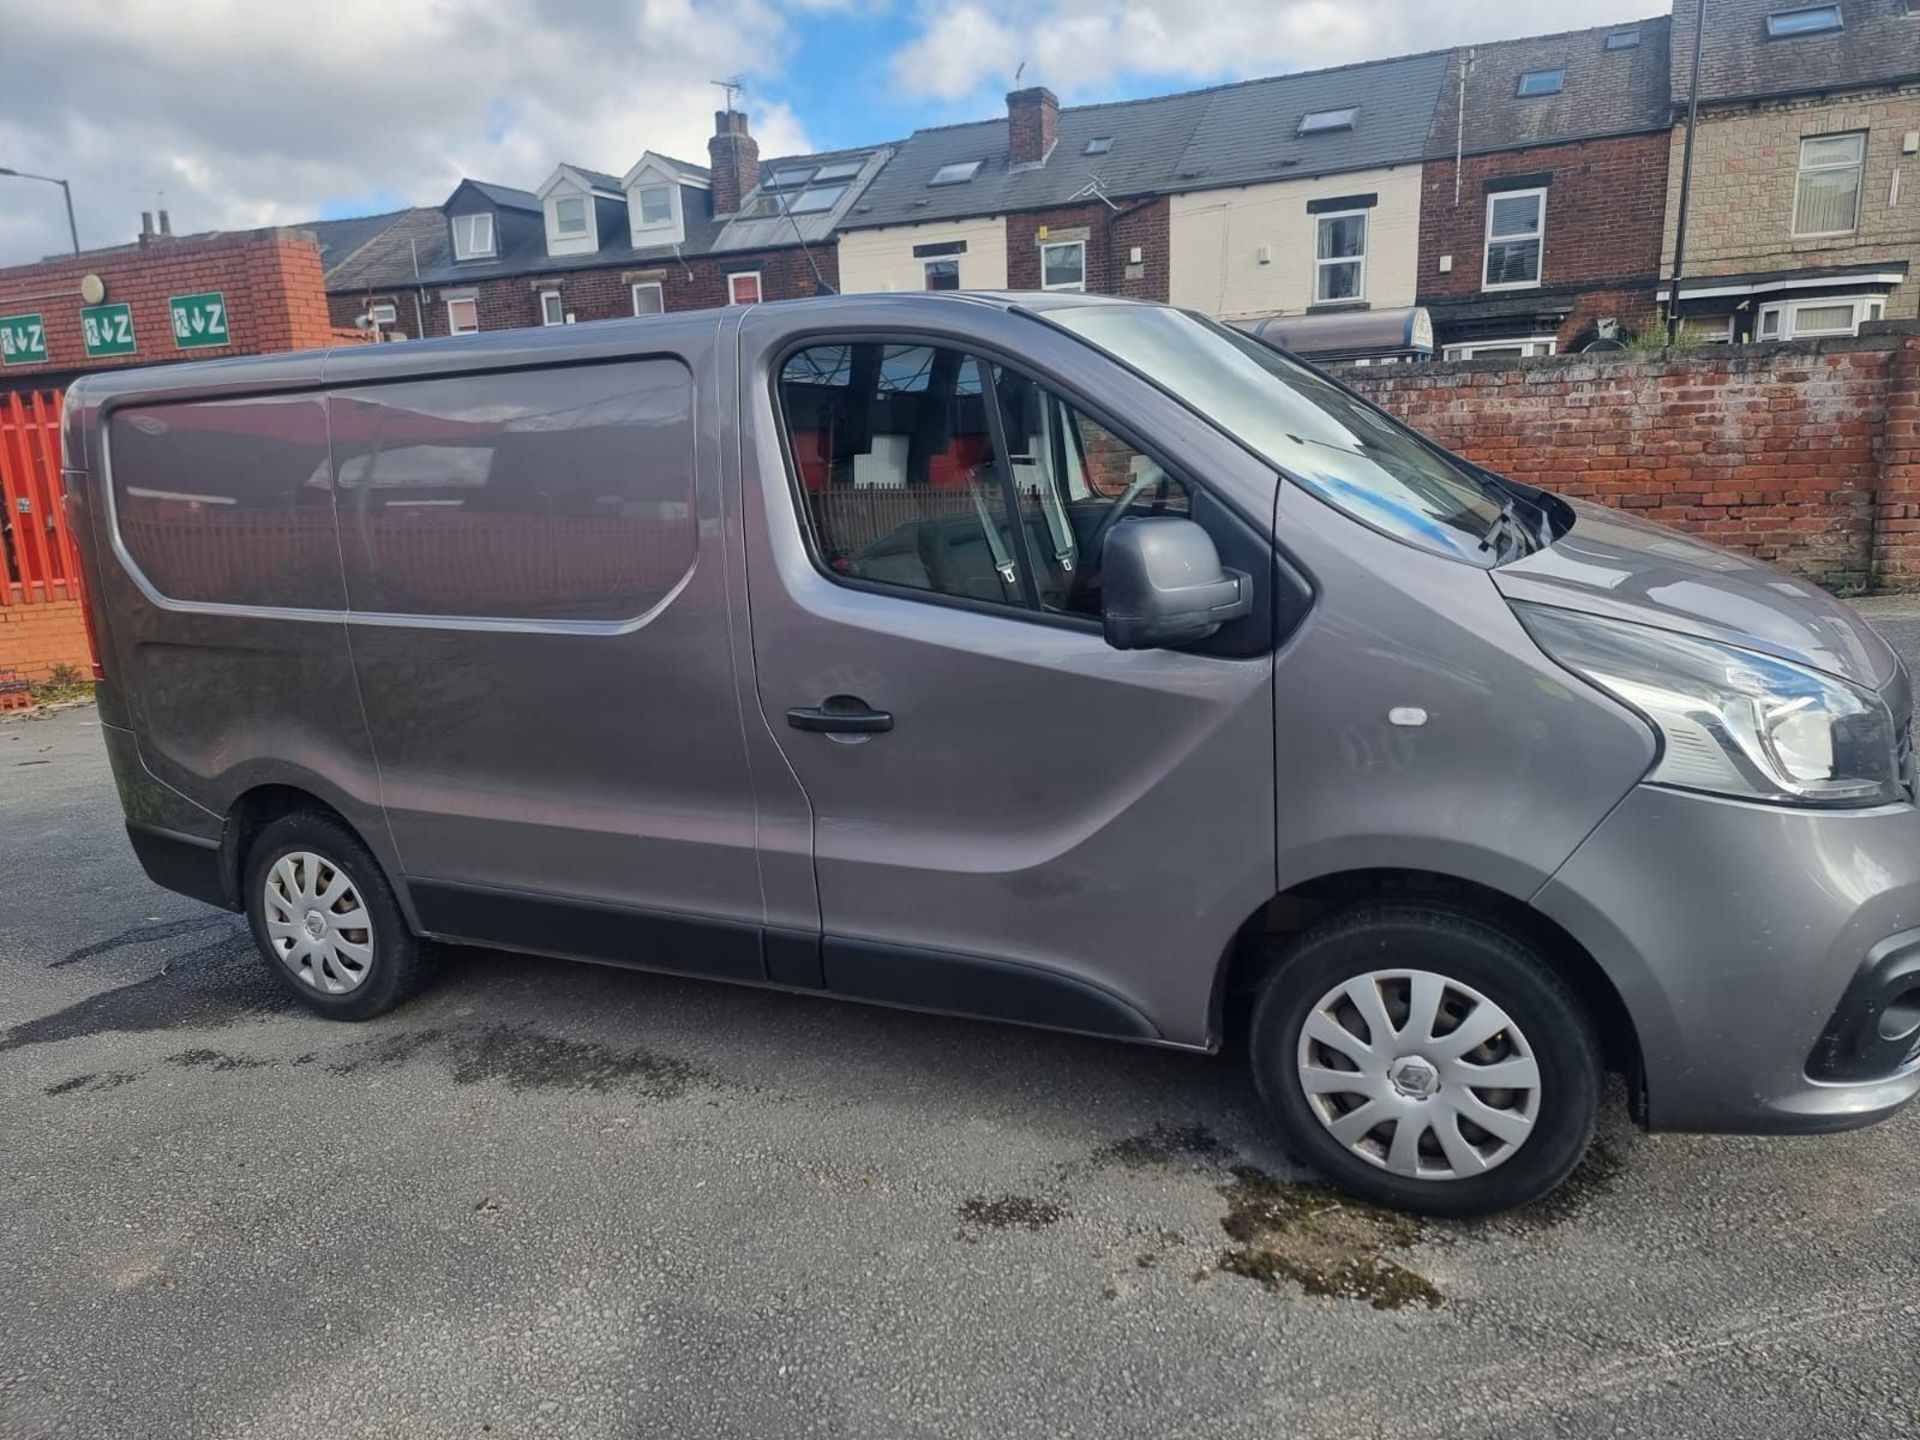 DN15 LZT RENAULT TRAFIC 2.7T 1.6 SL27 DCI 115 BUSINESS+ Panel Van. Comes with 1 key Date of - Image 5 of 7